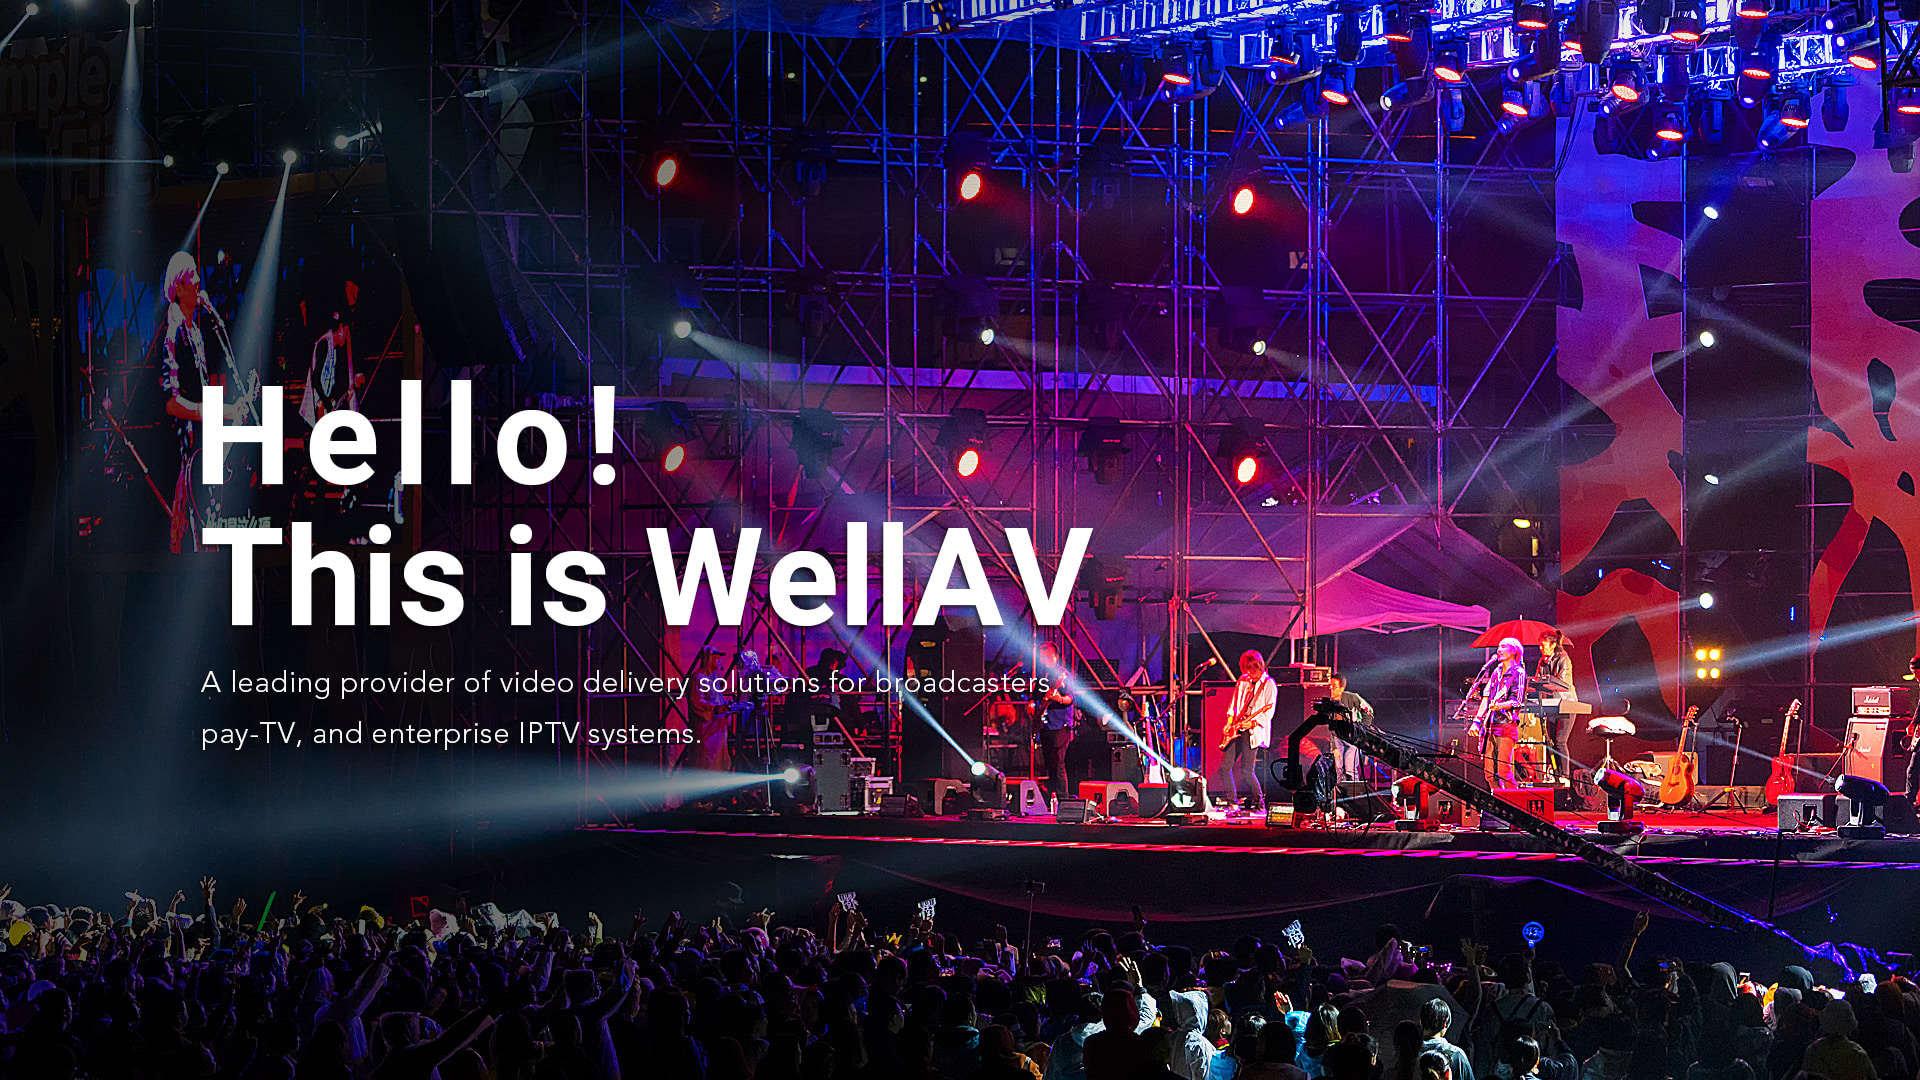 Hello, this is WellAV